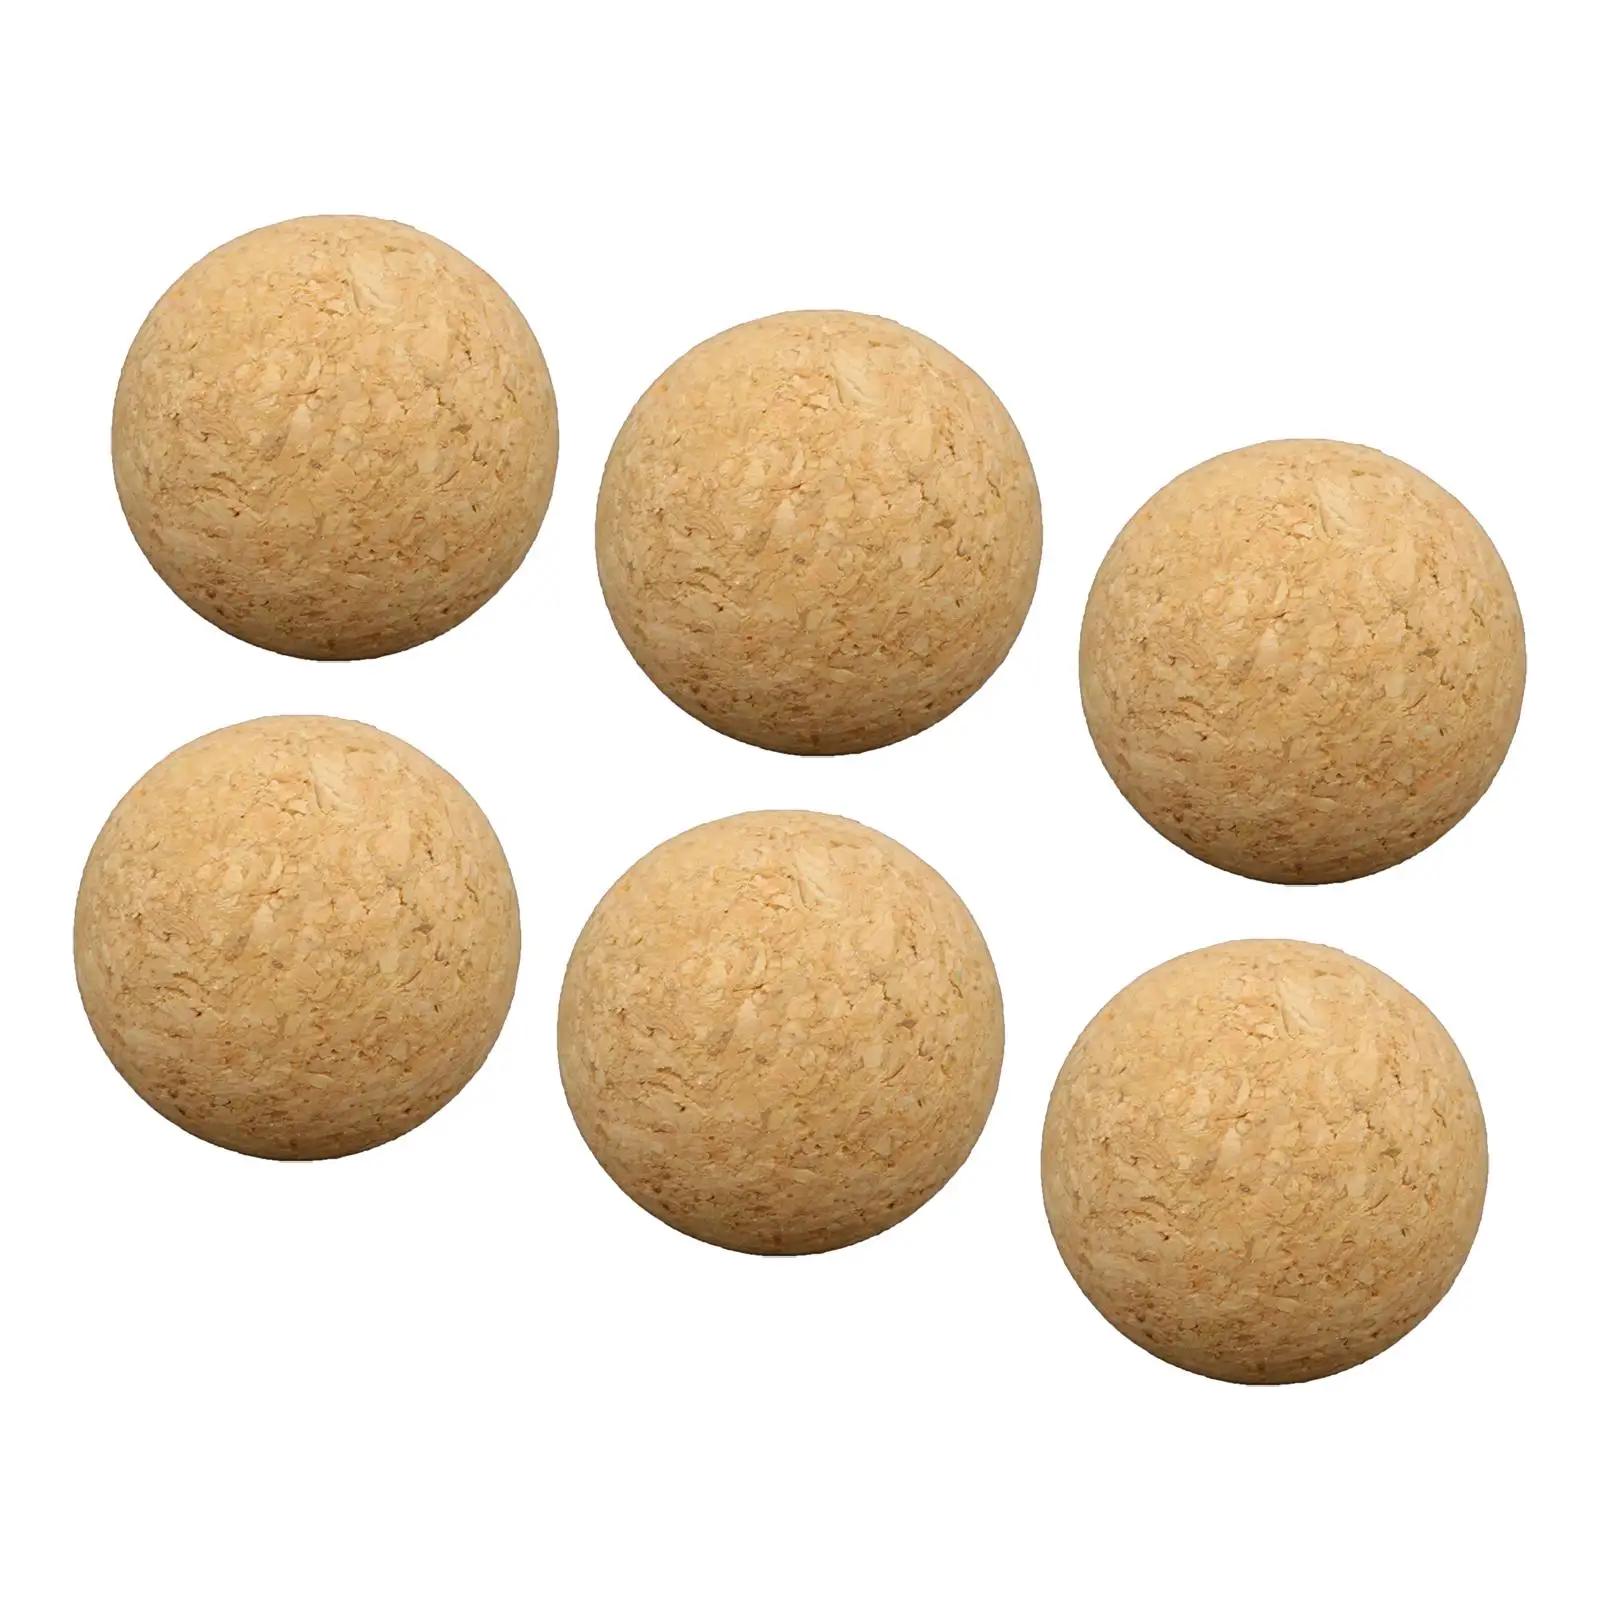 6x Table Football Cork Table Soccer Football Machine Replacement Accessories